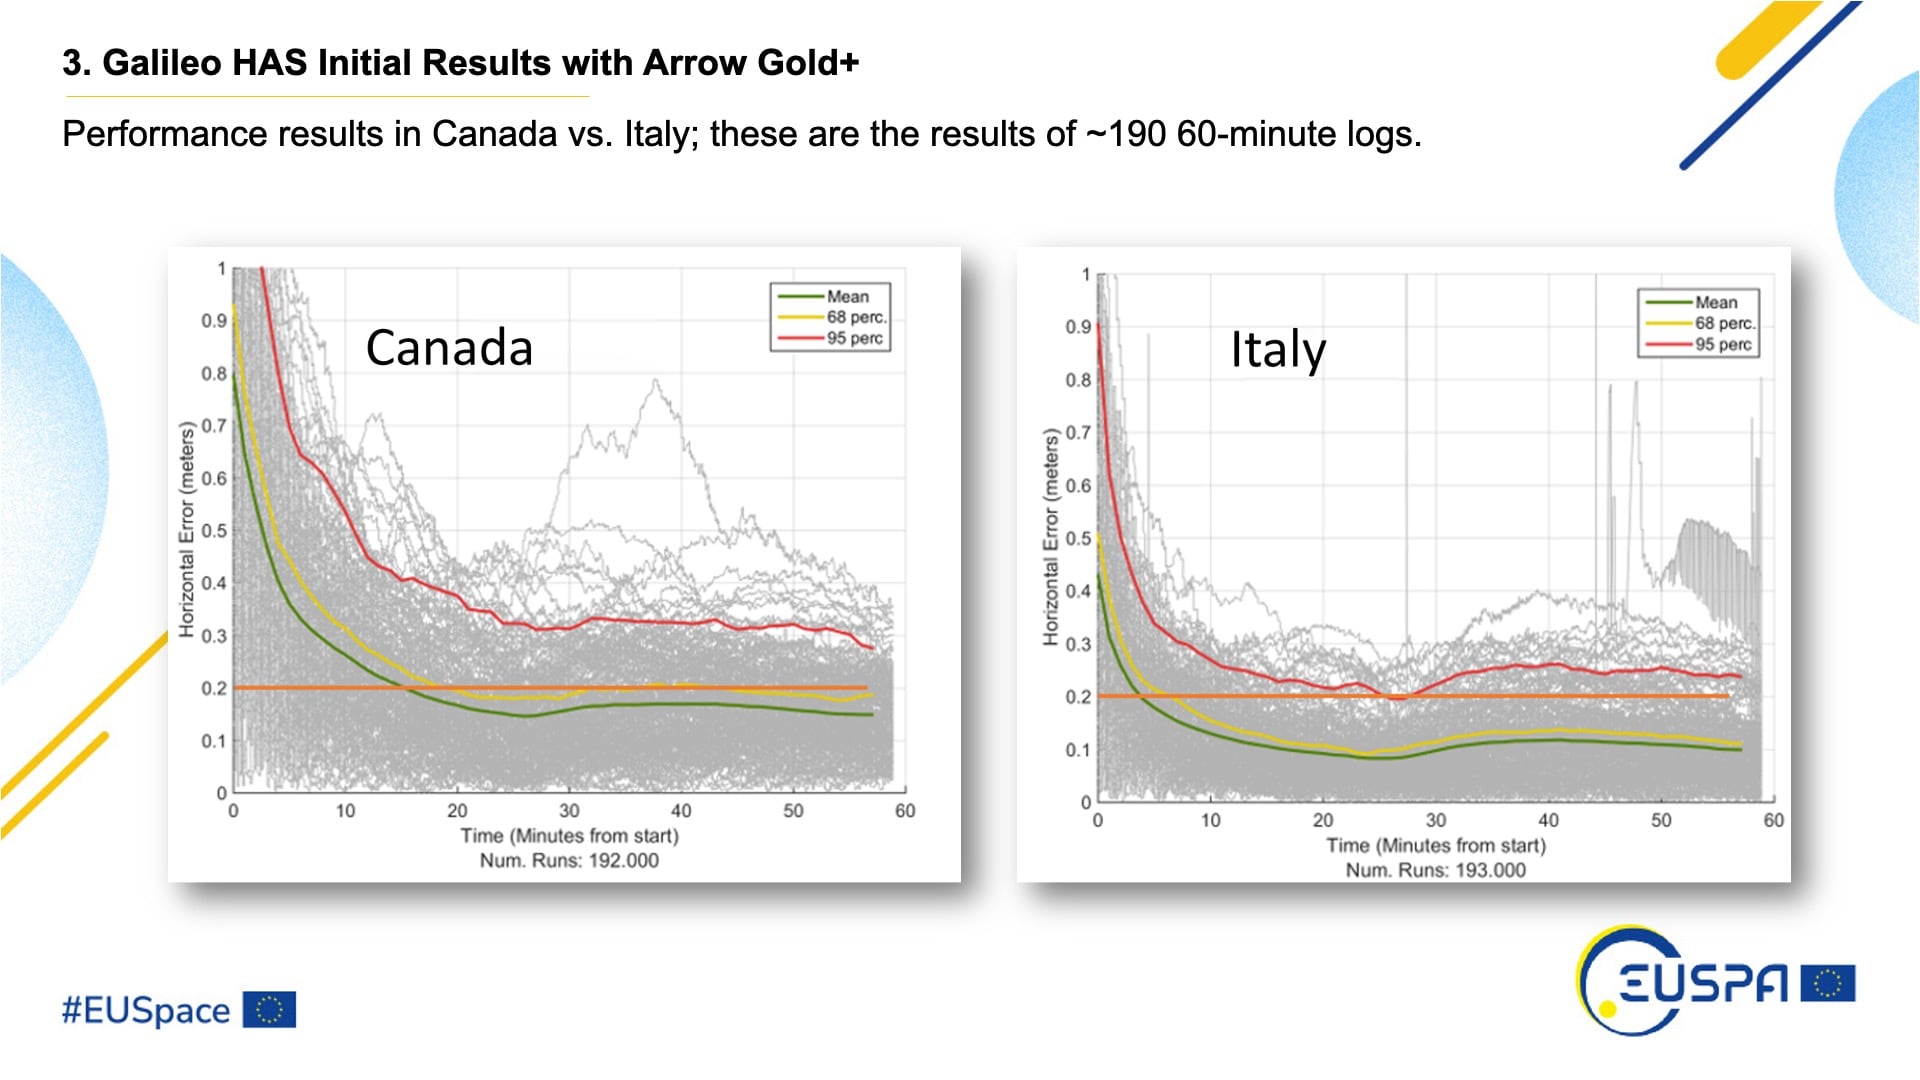 Initial Accuracy Testing Results of the Galileo High Accuracy Service Galileo HAS with the Eos Arrow Gold+ GNSS Receiver in North America vs. Europe